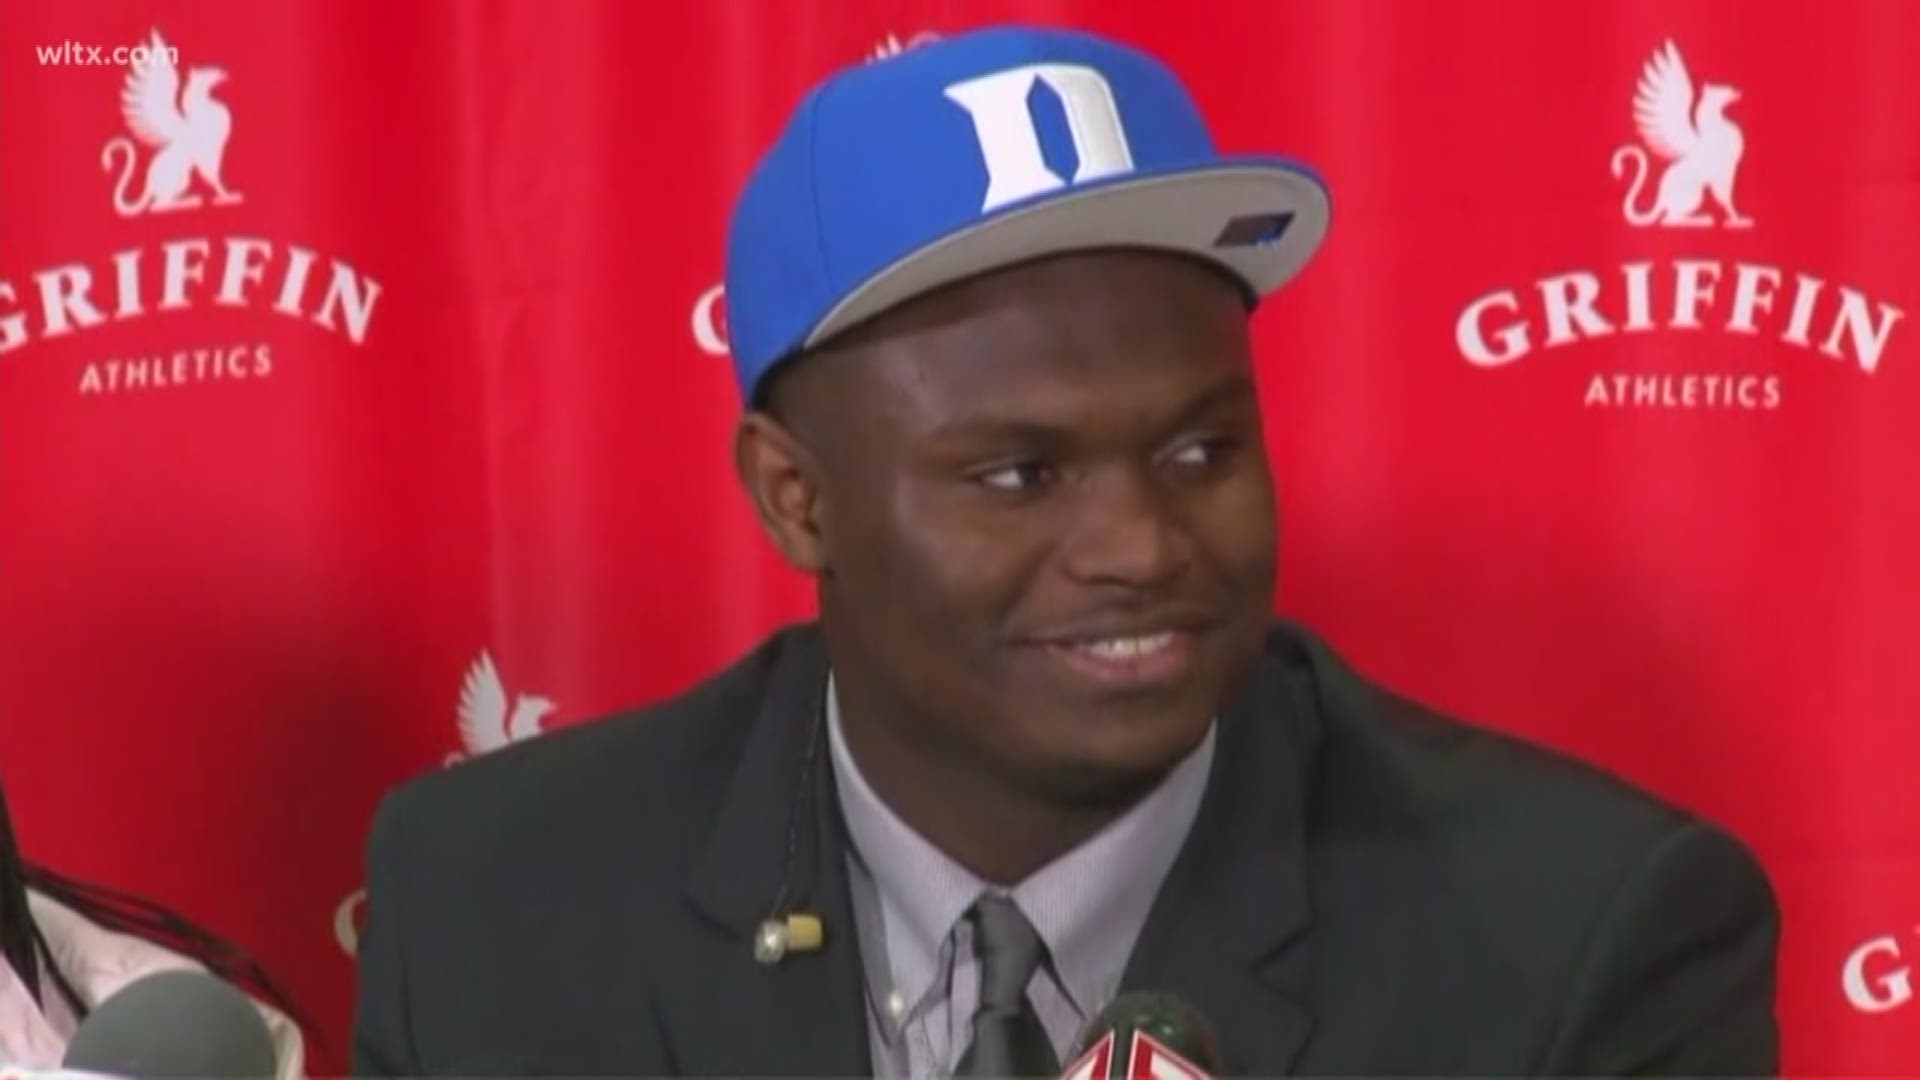 Watch all of Zion Williamson's announcement that he's going to play for the Duke Blue Devils.